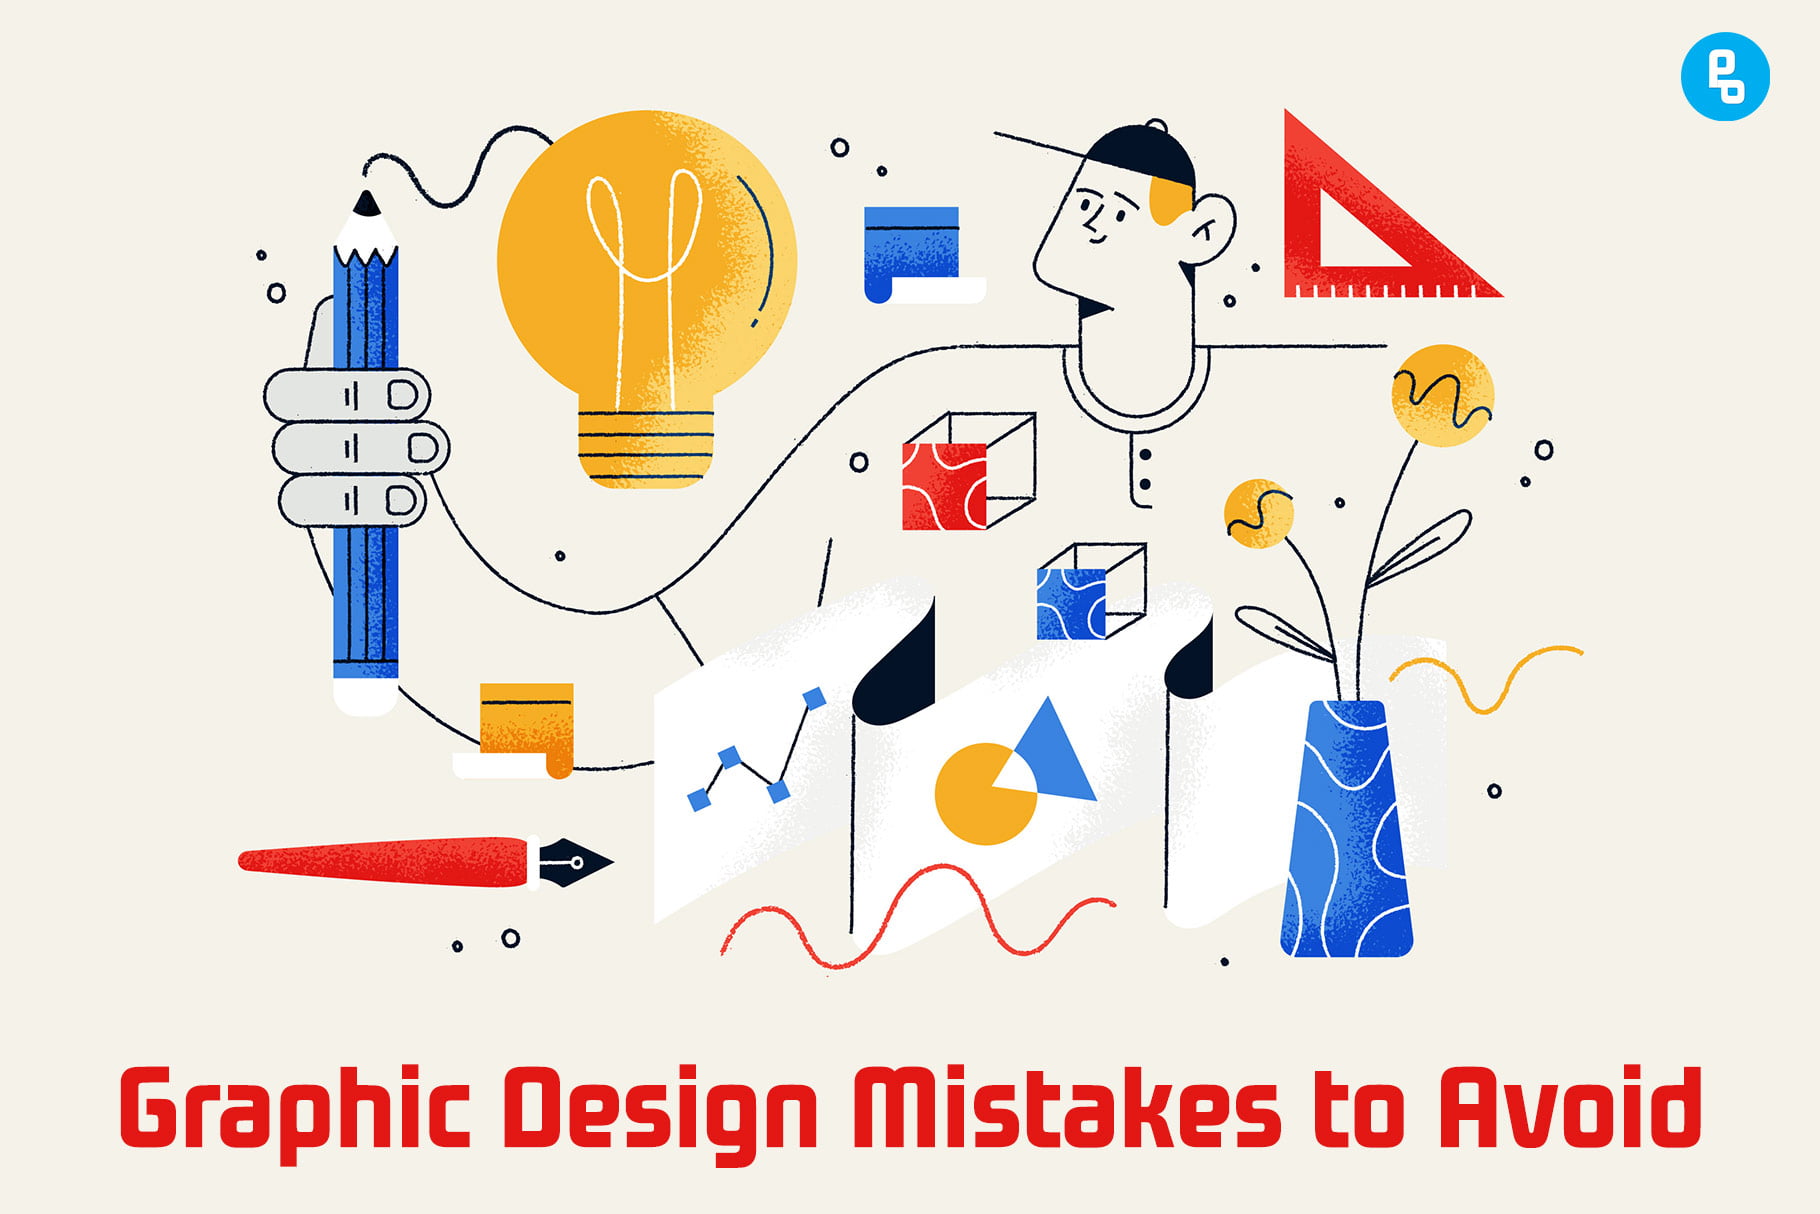 These mistakes can prevent your design from being effective and provide a poor user experience for your customers. Here are 12 mistakes every graphic designer should avoid